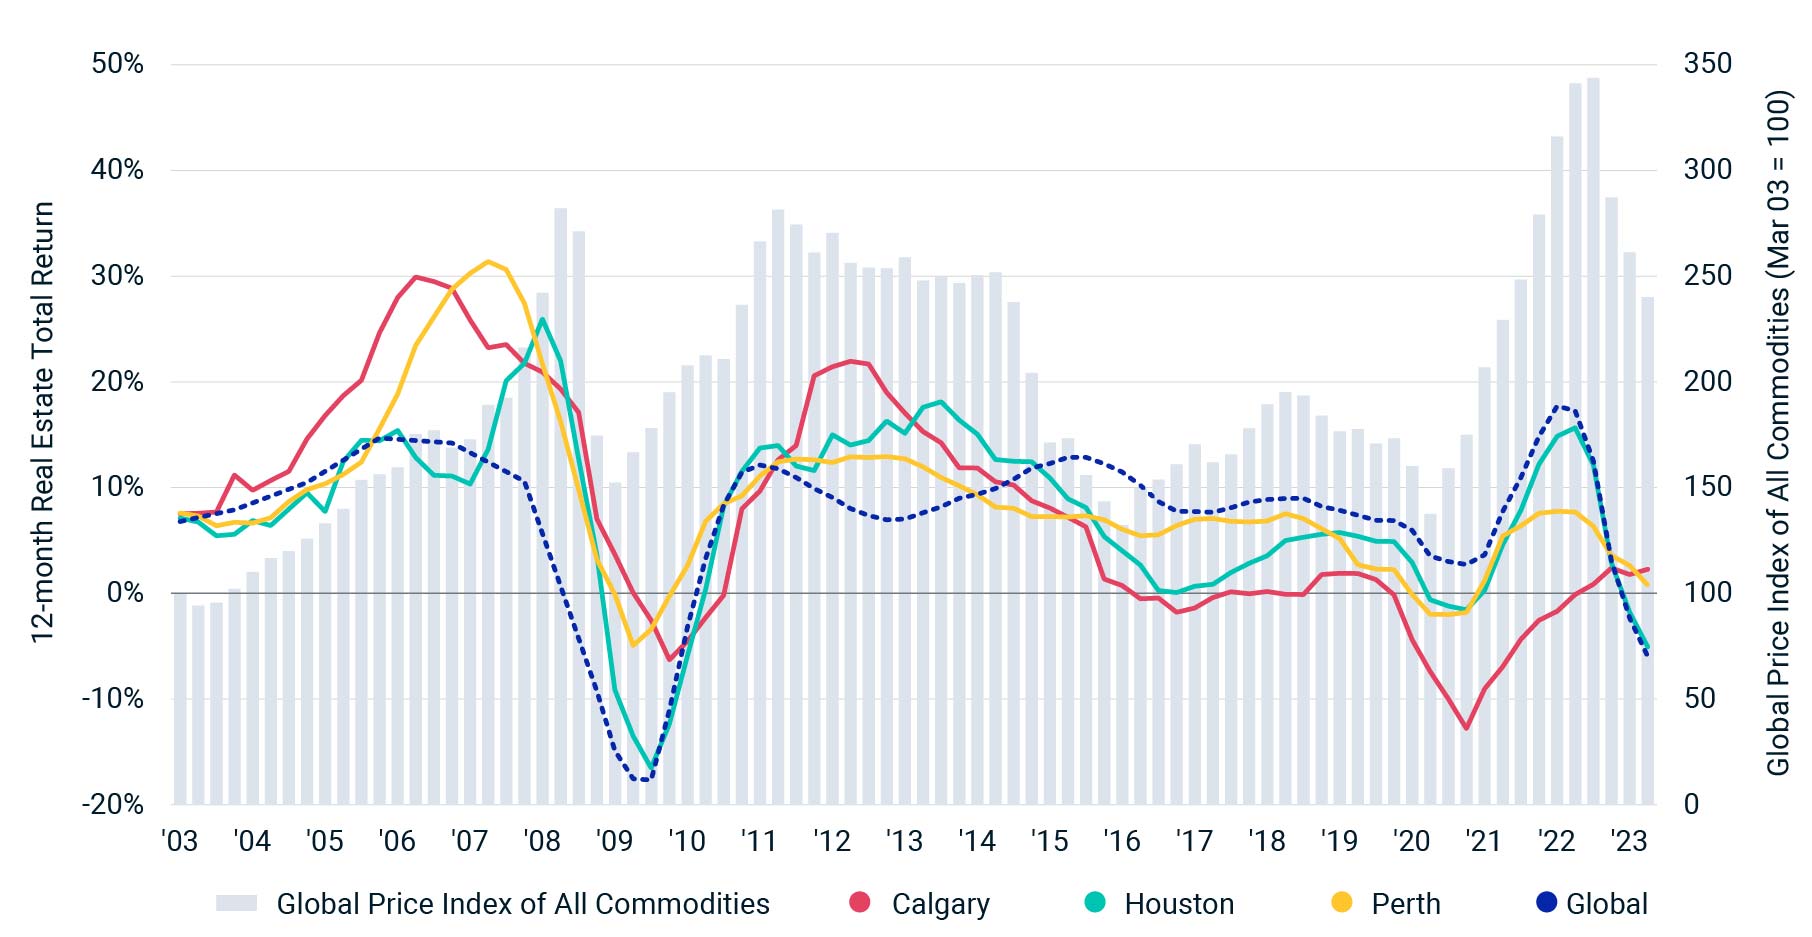 The chart shows the 12-month returns for Calgary, Perth, Houston and 12-month global returns, with the IMF price index for all commodities also plotted. 